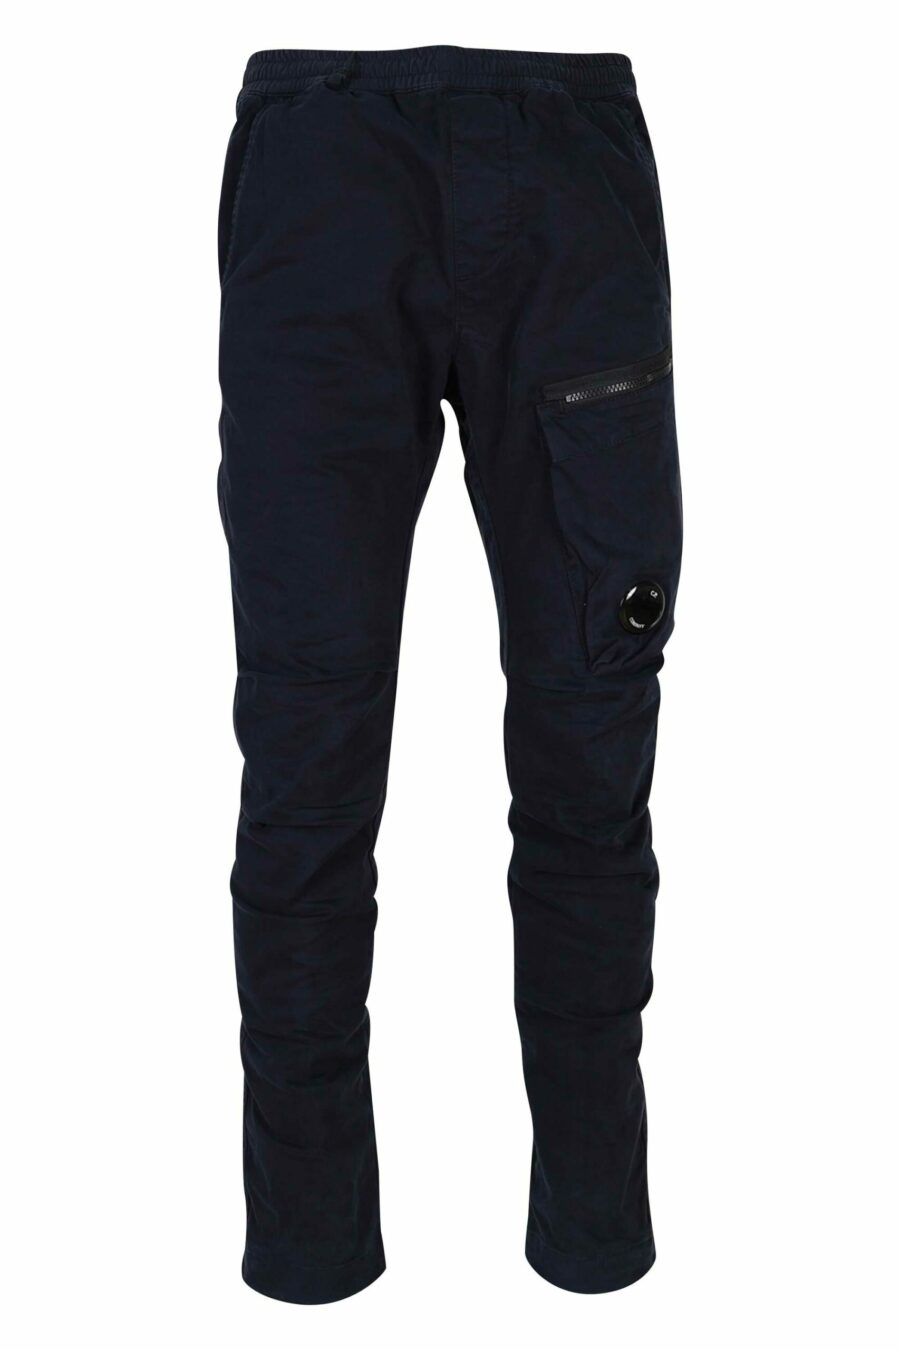 Dark blue stretch satin trousers with side pocket and logo lens - 7620943578485 1 scaled